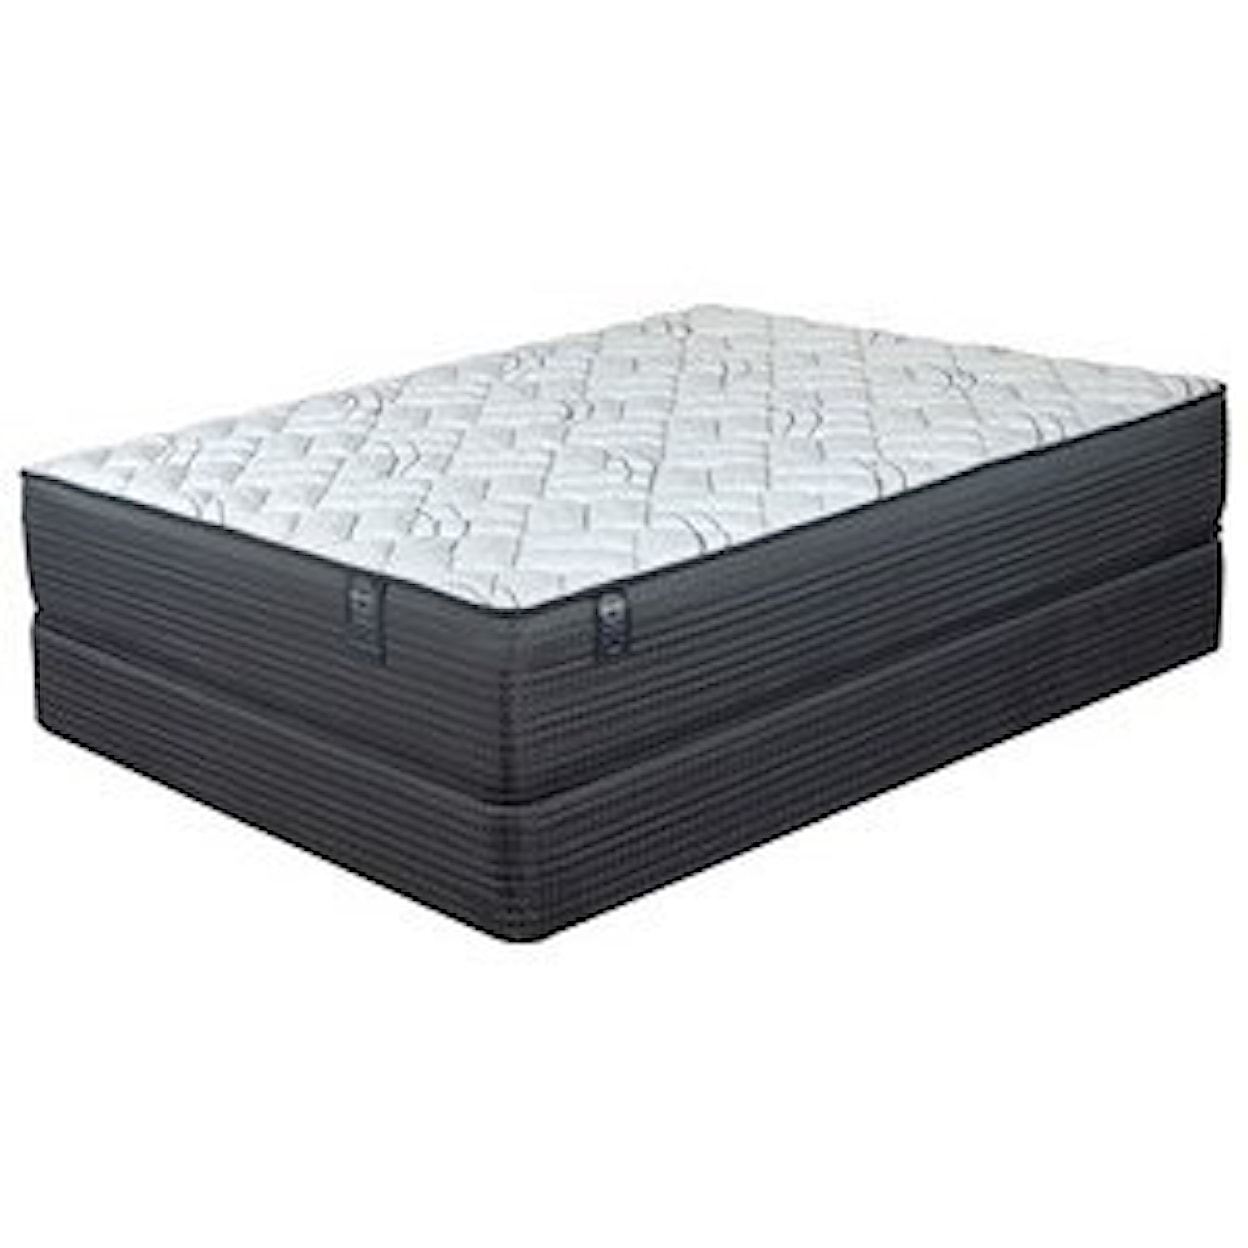 Restonic Duvall Firm King 14" Firm Two Sided Mattress Set